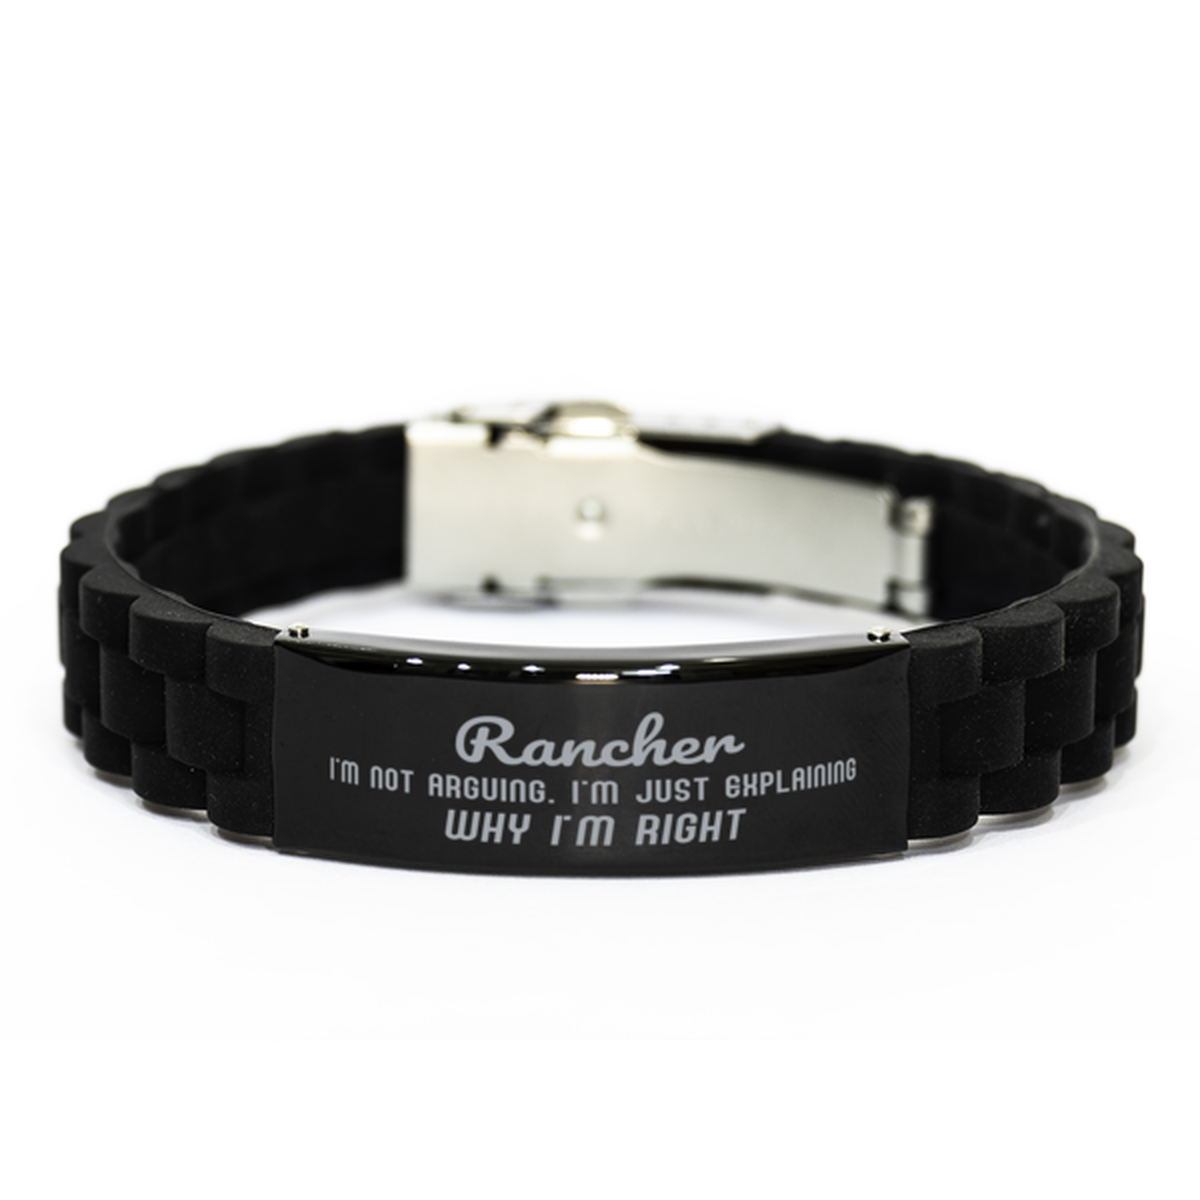 Rancher I'm not Arguing. I'm Just Explaining Why I'm RIGHT Black Glidelock Clasp Bracelet, Funny Saying Quote Rancher Gifts For Rancher Graduation Birthday Christmas Gifts for Men Women Coworker